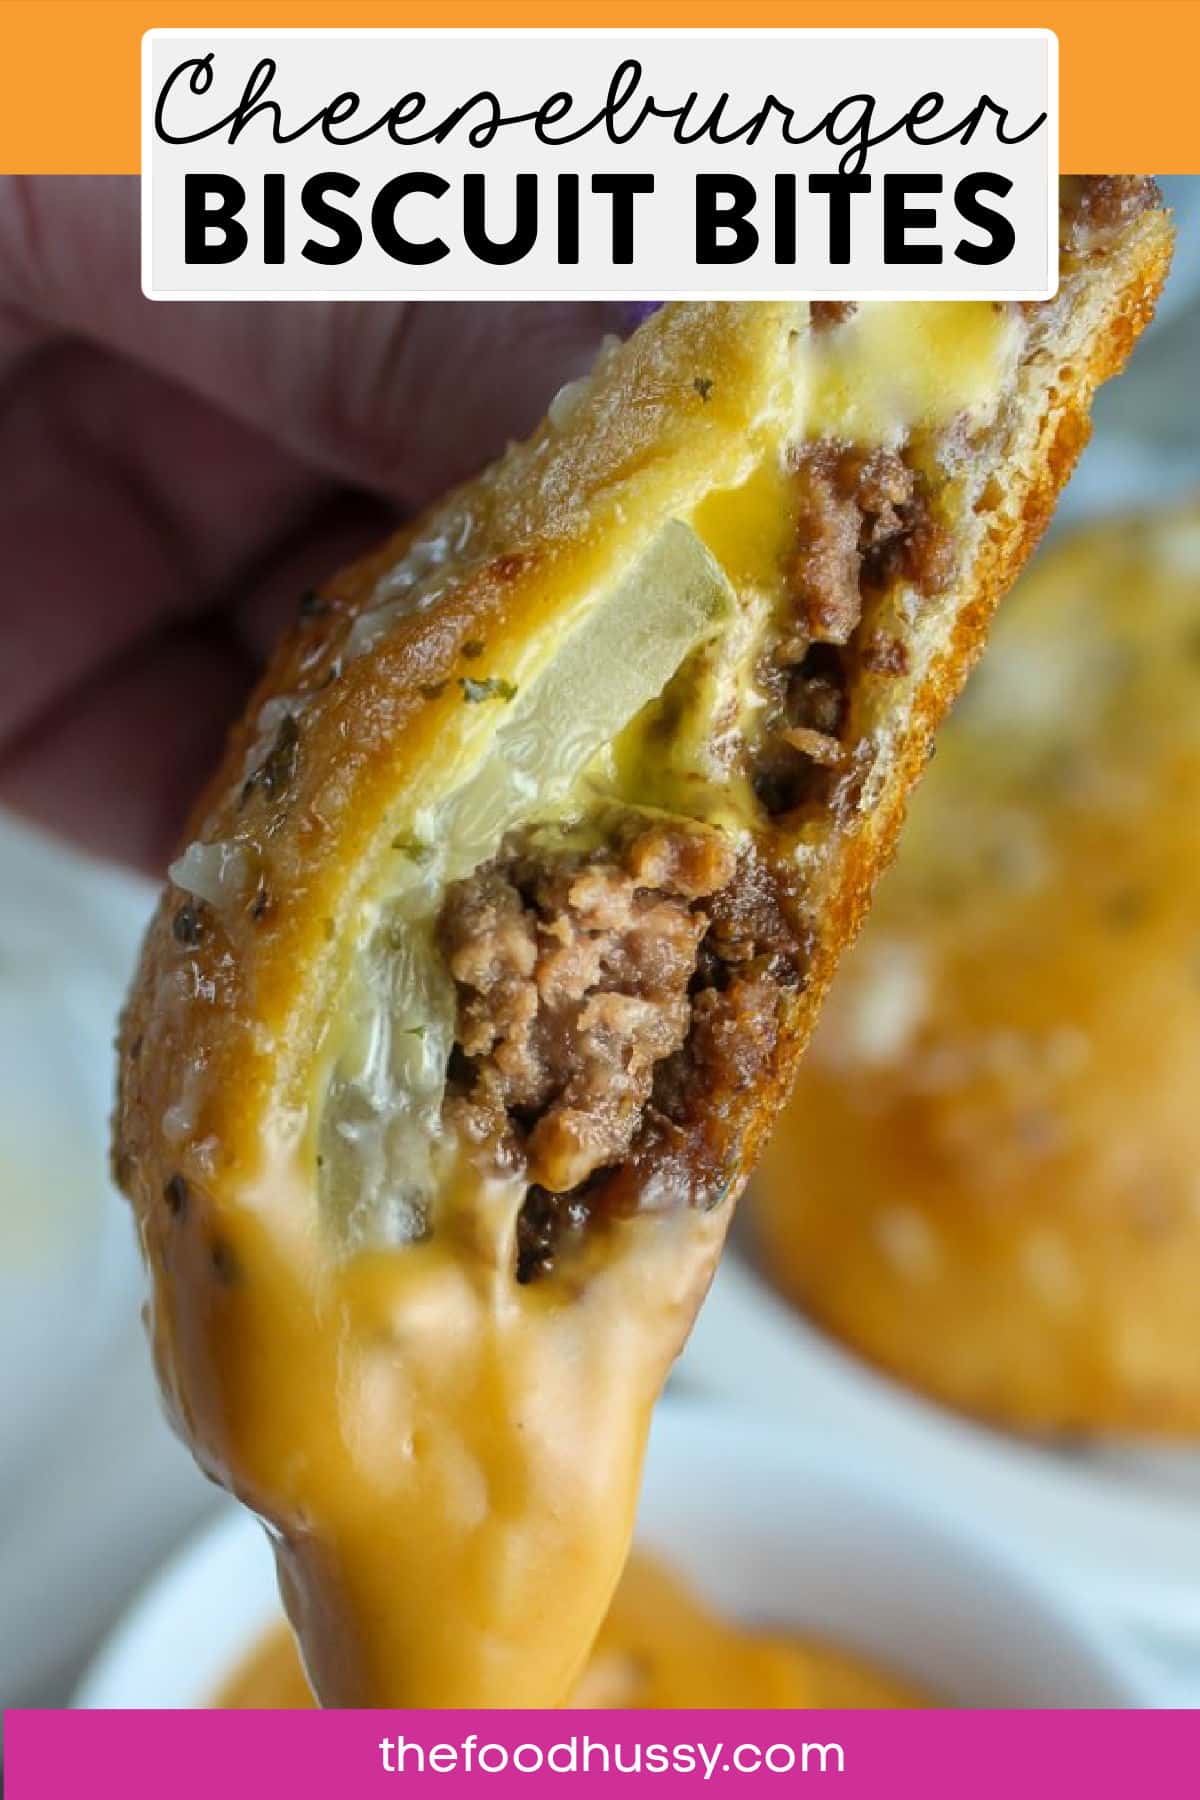 Maid Rites are my hometown favorite meal - I've been eating them since I could chew! These Cheeseburger Biscuit Bites are a delicious take on the traditional sandwich made with a can of biscuits and some garlic butter - so good!!!  via @foodhussy